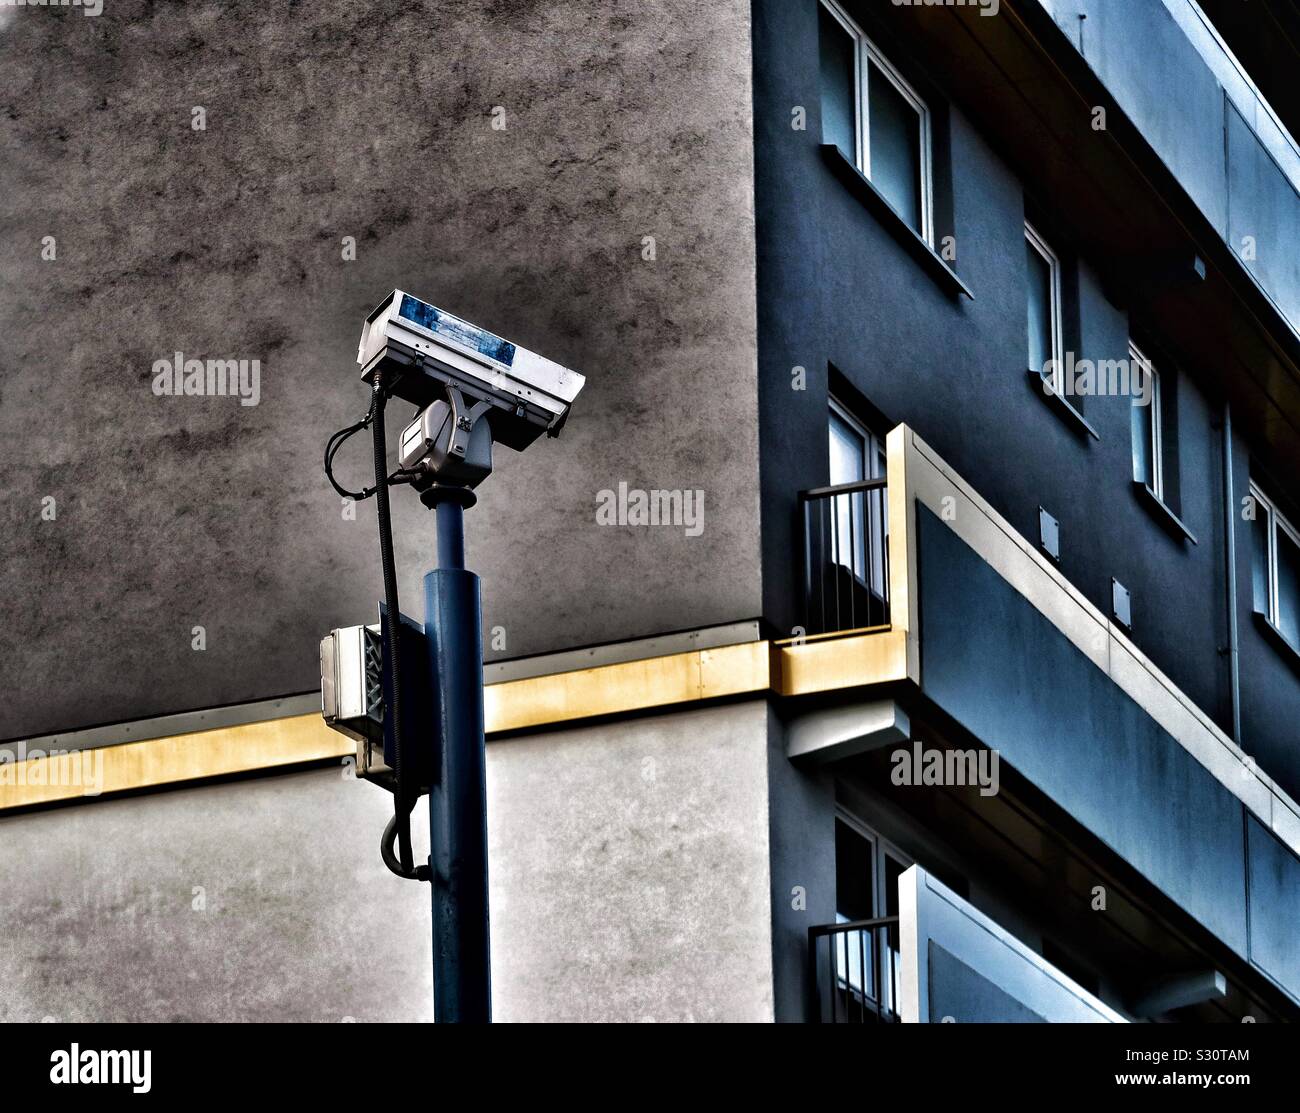 Big brother is watching Stock Photo